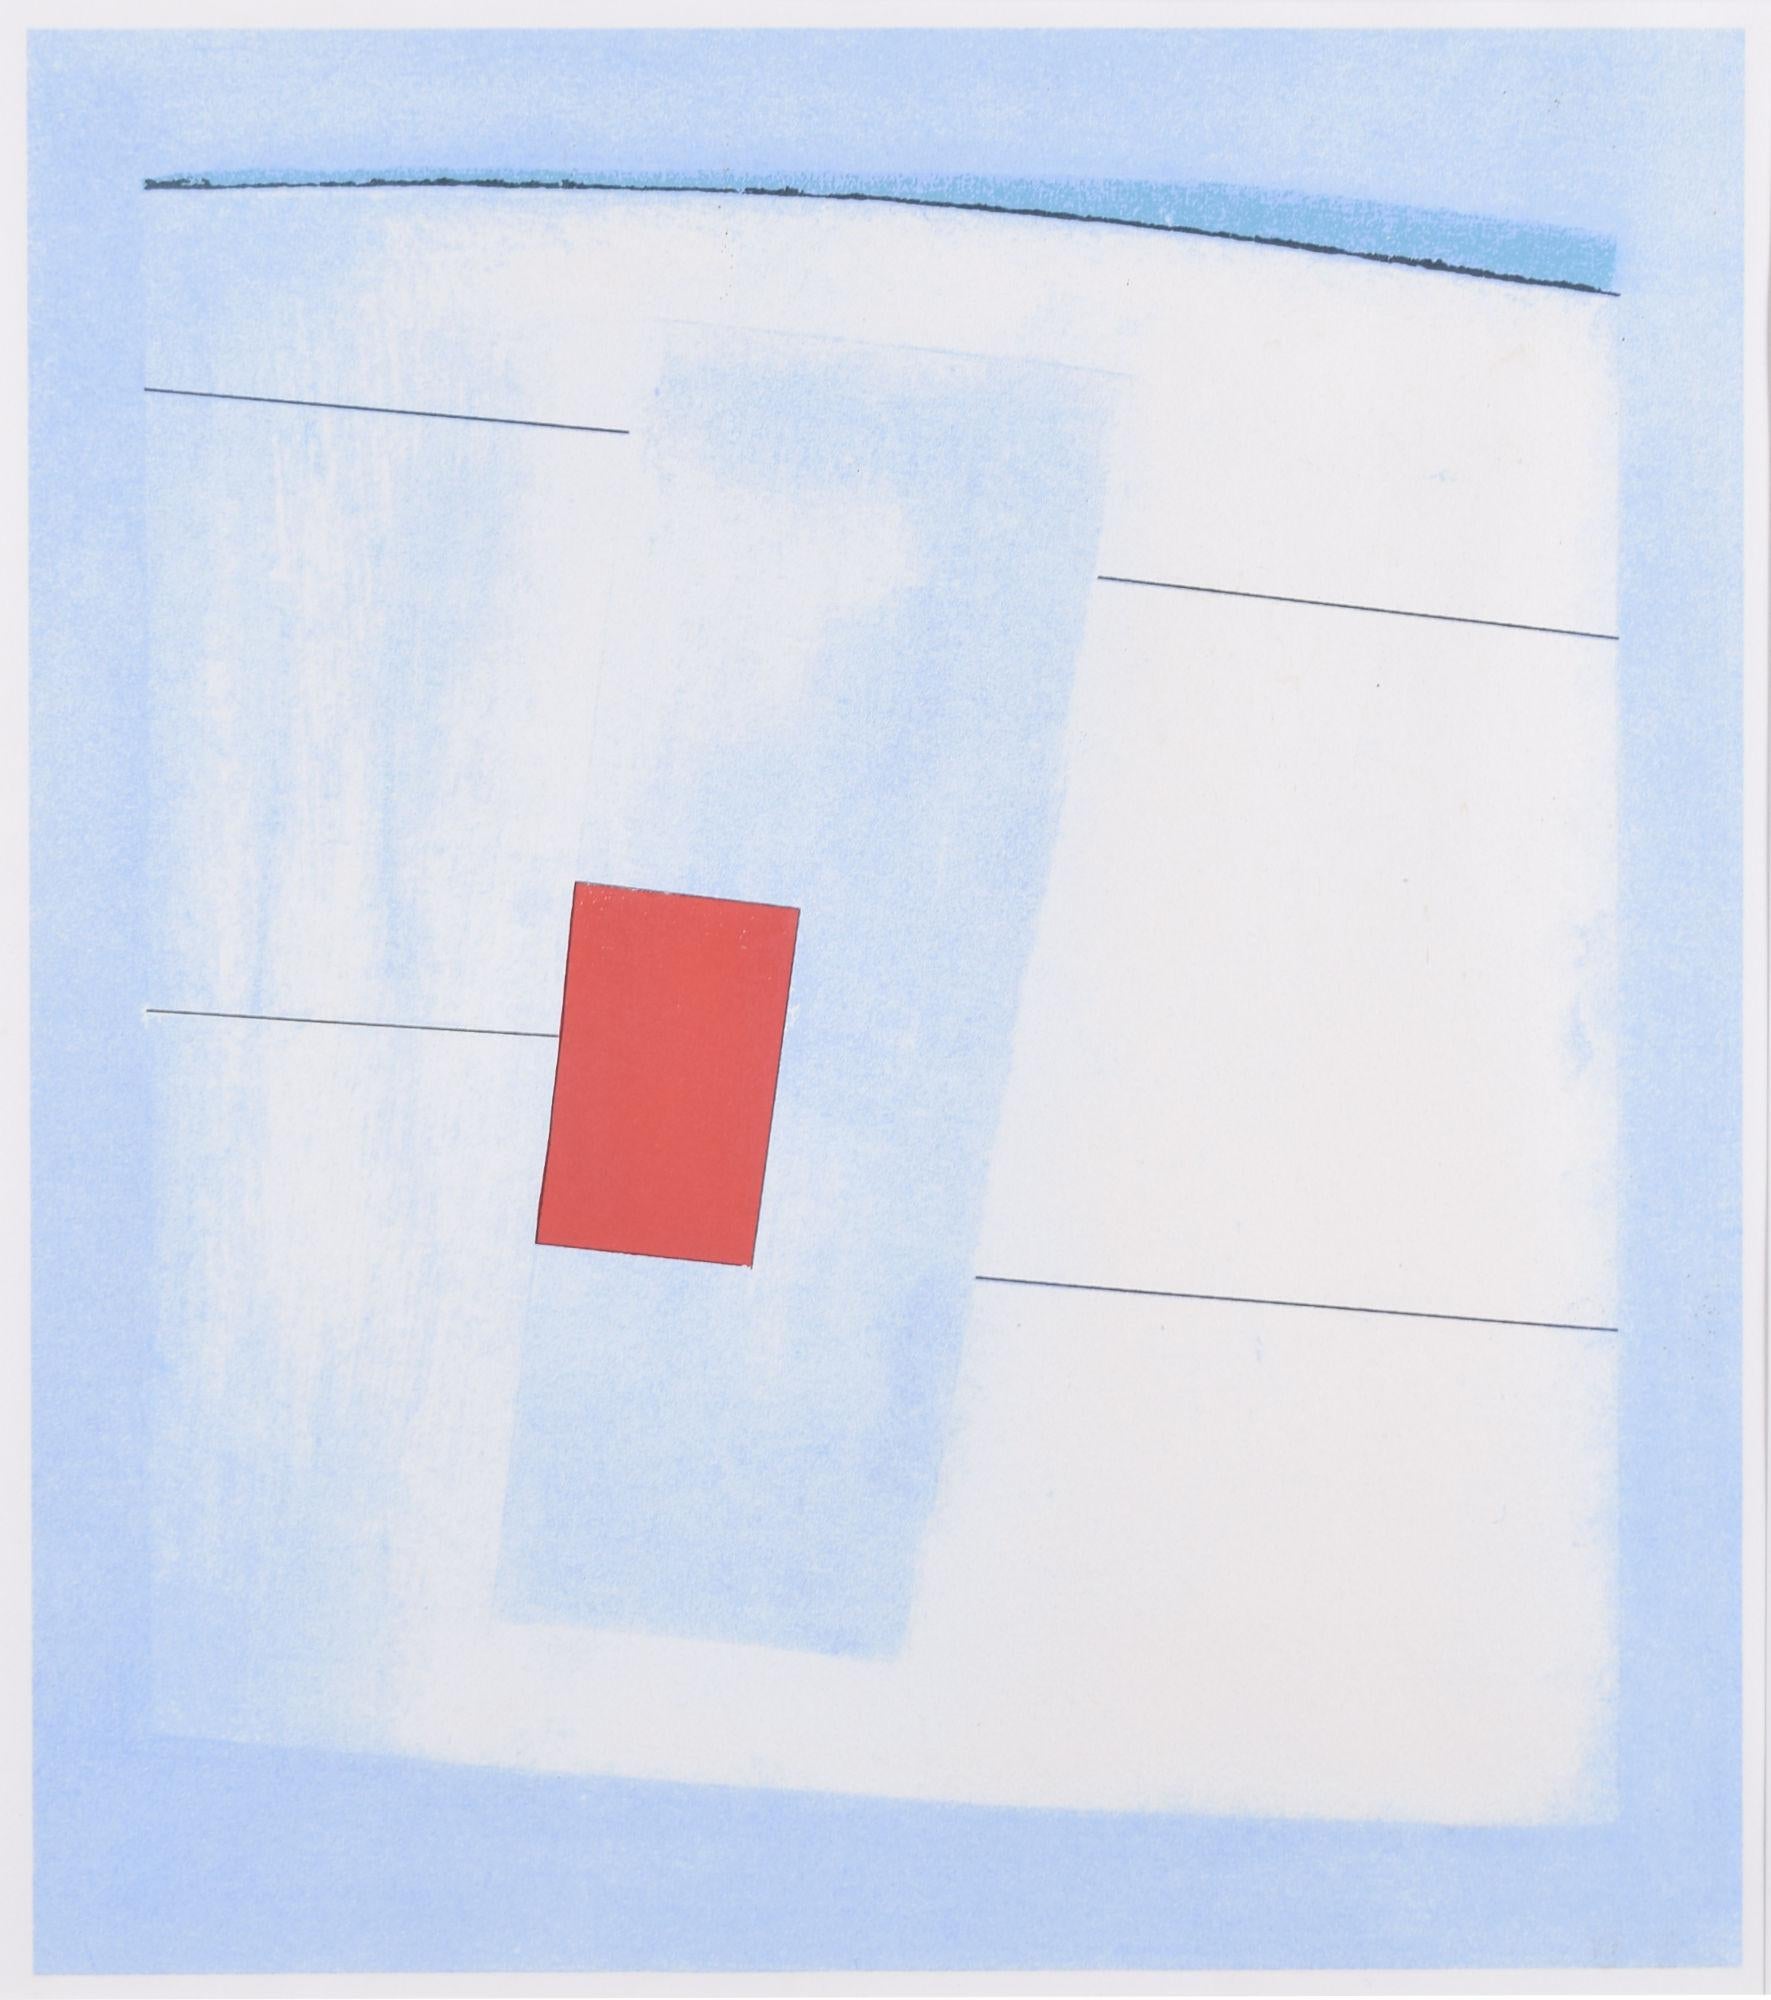 To see our other Modern British Art, scroll down to "More from this Seller" and below it click on "See all from this Seller" - or send us a message if you cannot find the artist you want.

Ben Nicholson OM (1894 - 1982)
Cyclades
Silkscreen print
57